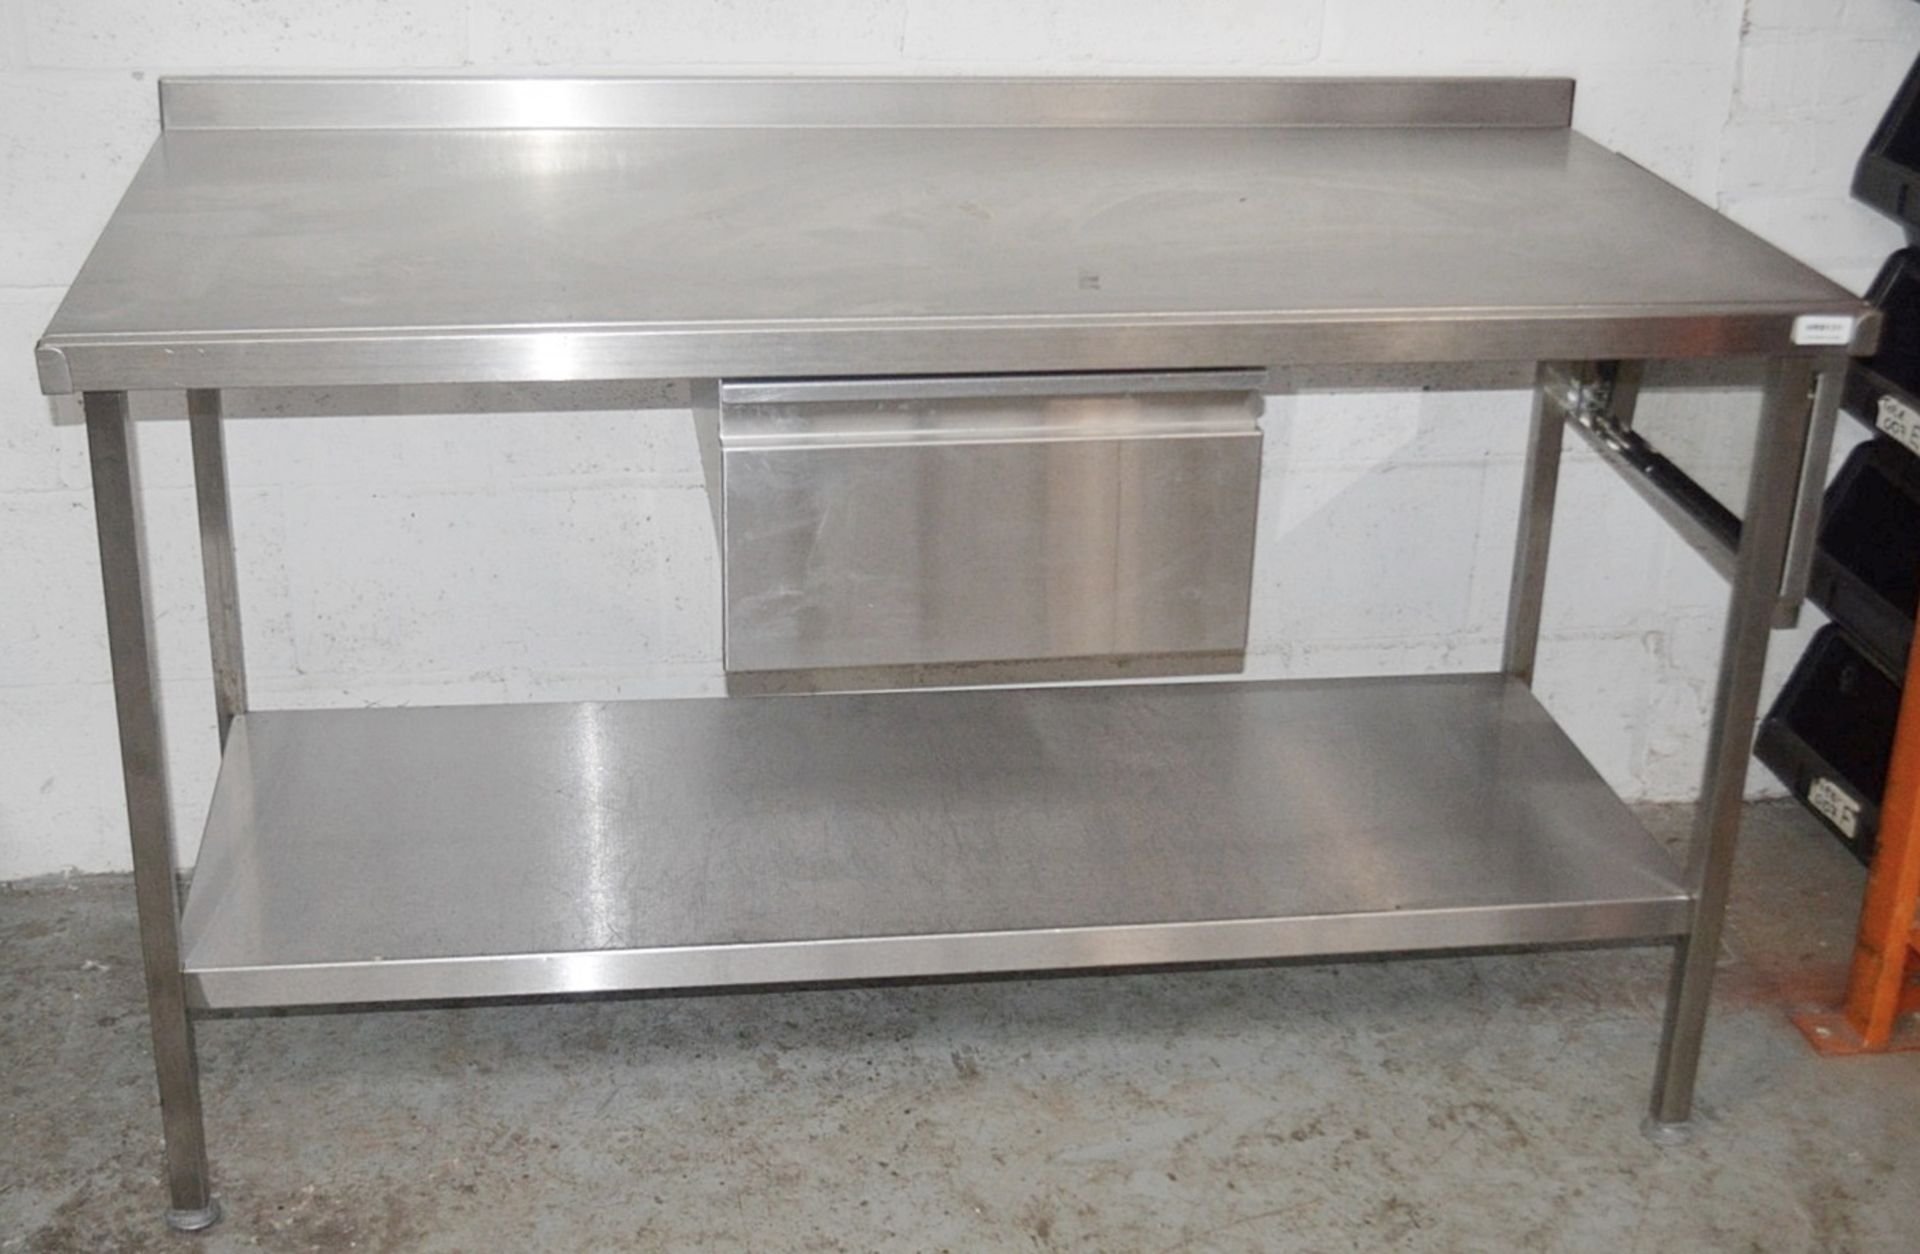 1 x Stainless Steel Commercial Kitchen Prep Counter With Drawer And Upstand - Dimensions: H86 x W150